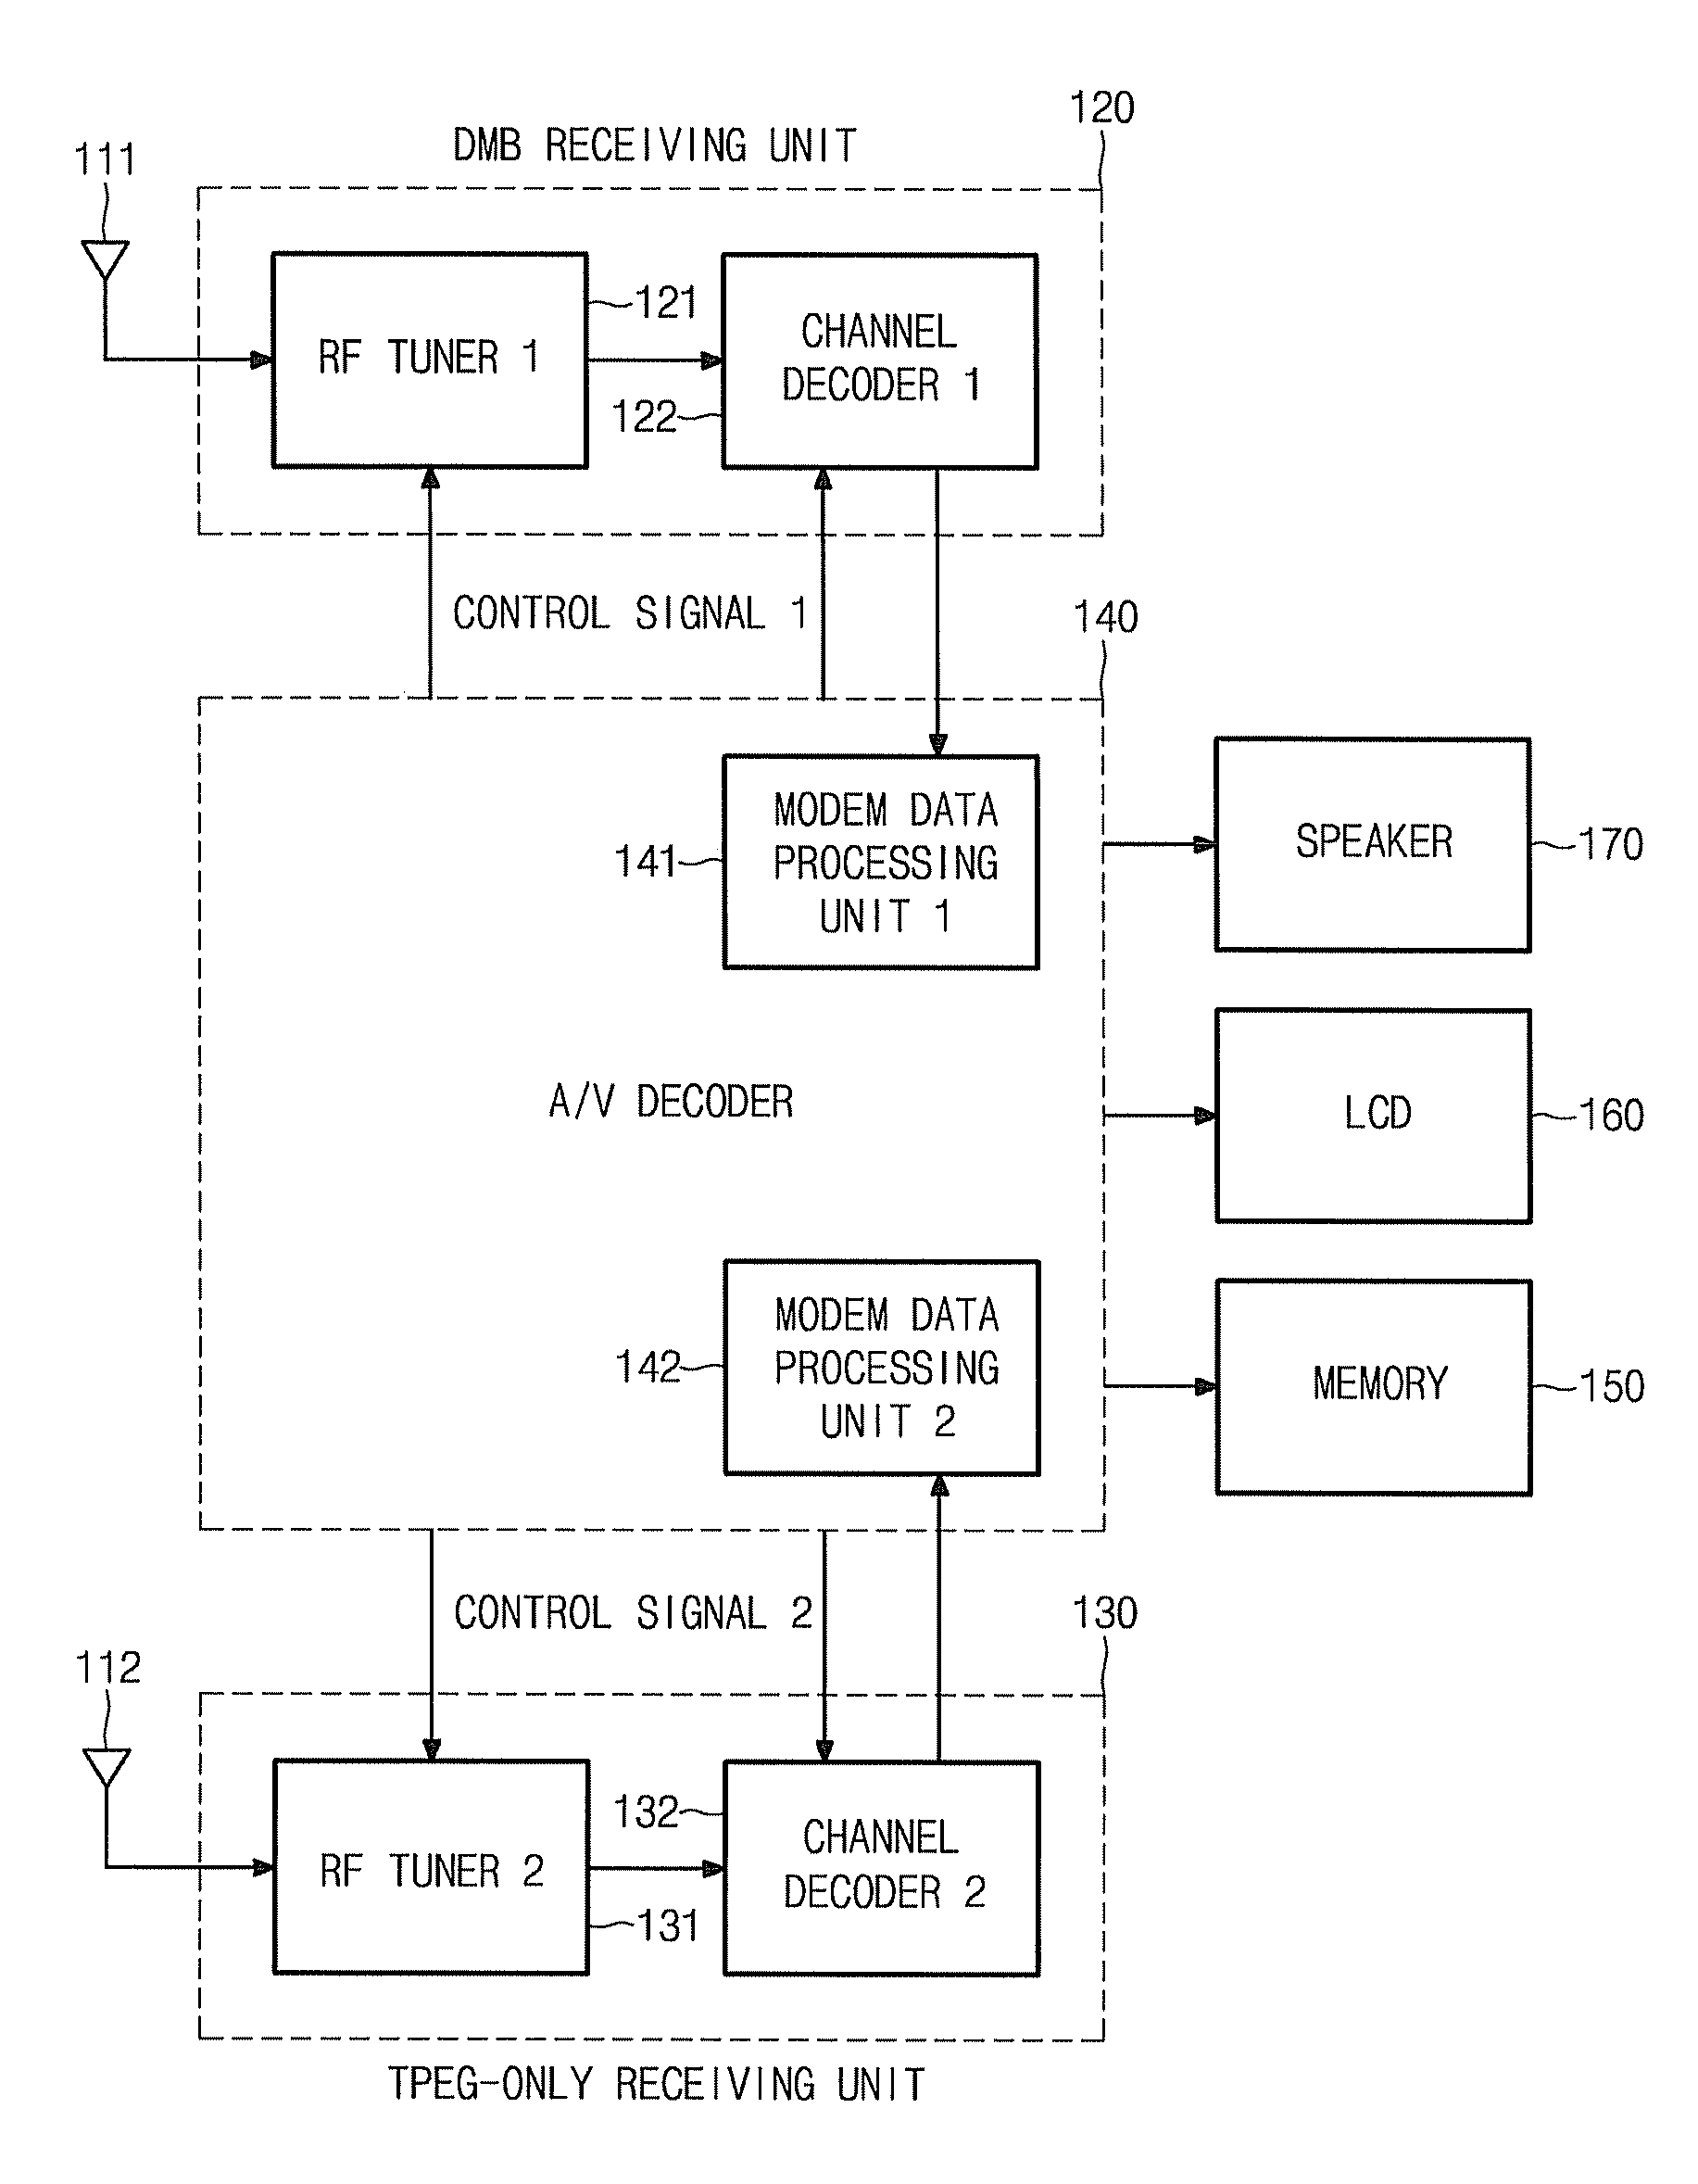 Digital multimedia broadcasting system for reducing scan time, and method for the same